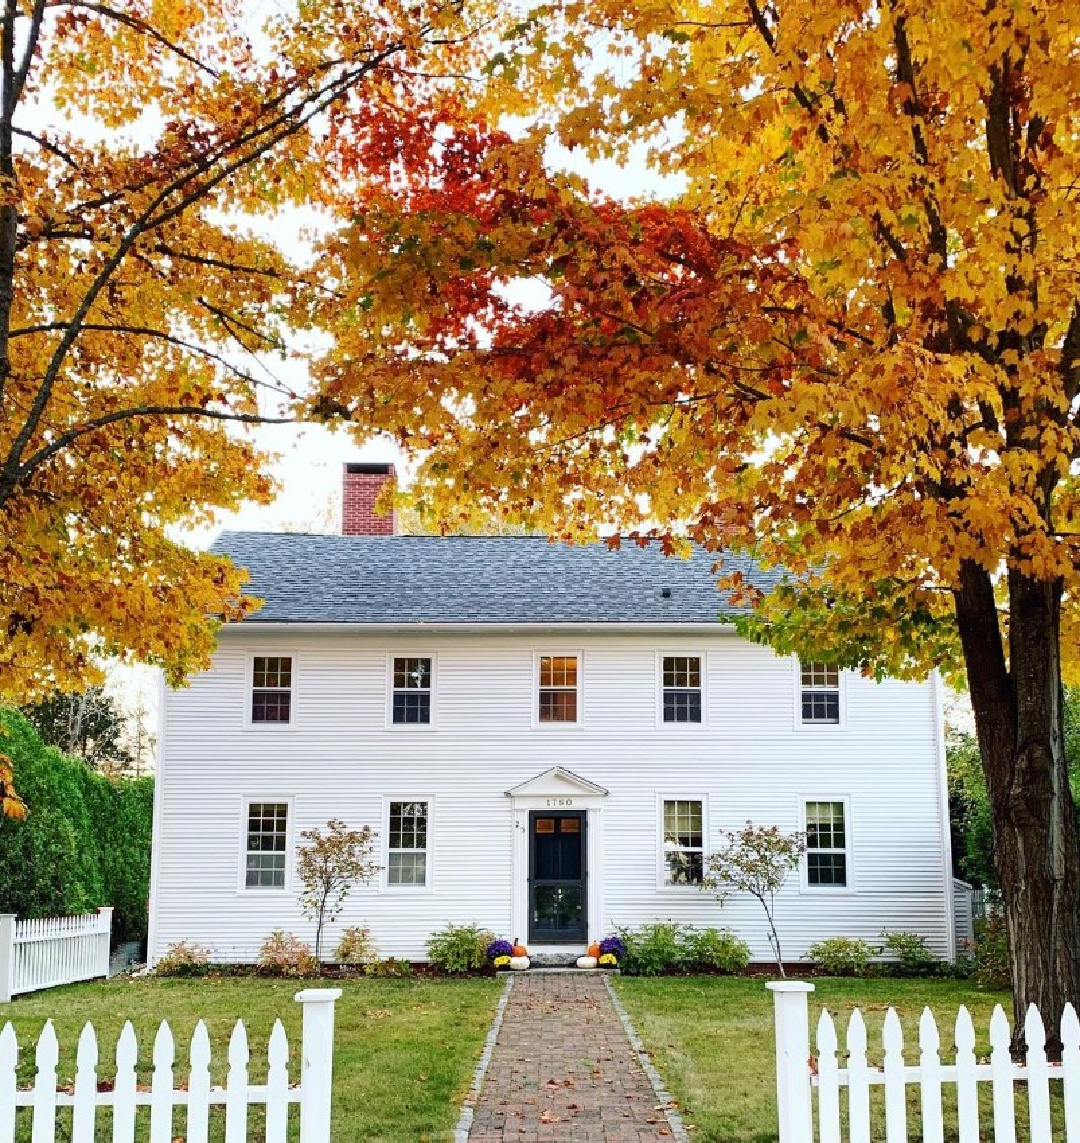 Loi Thai's breathtaking Maine cottage in fall - @ourmainecottage. #newenglandfall #historicottages #fallcottages